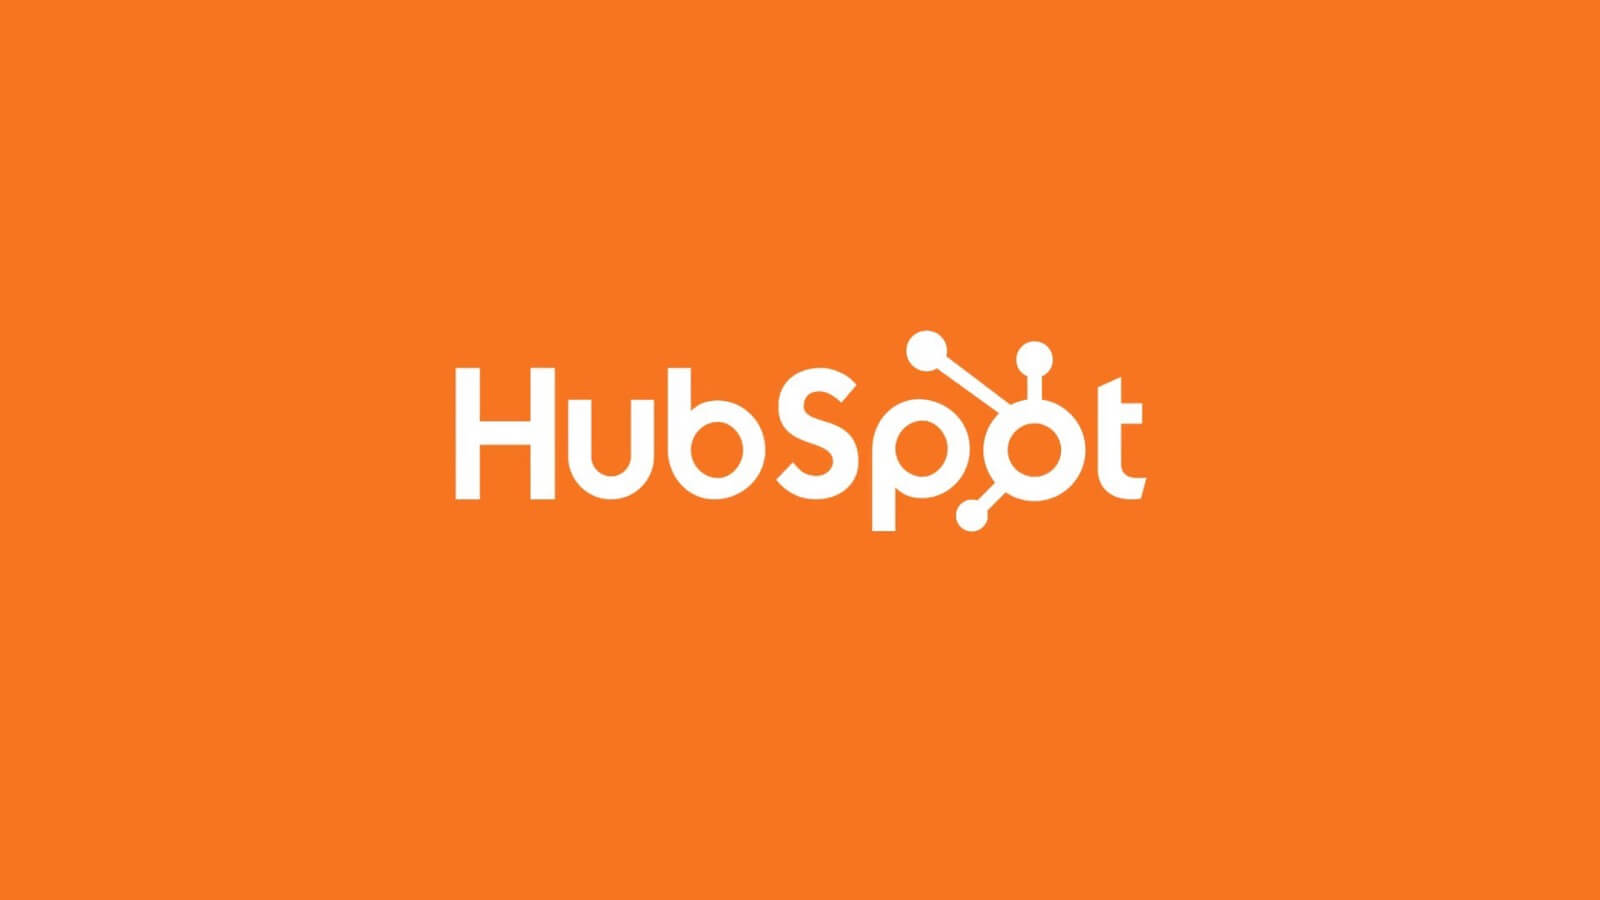 Elevating Your Business - 10 Reasons Why HubSpot Is the Right Choice